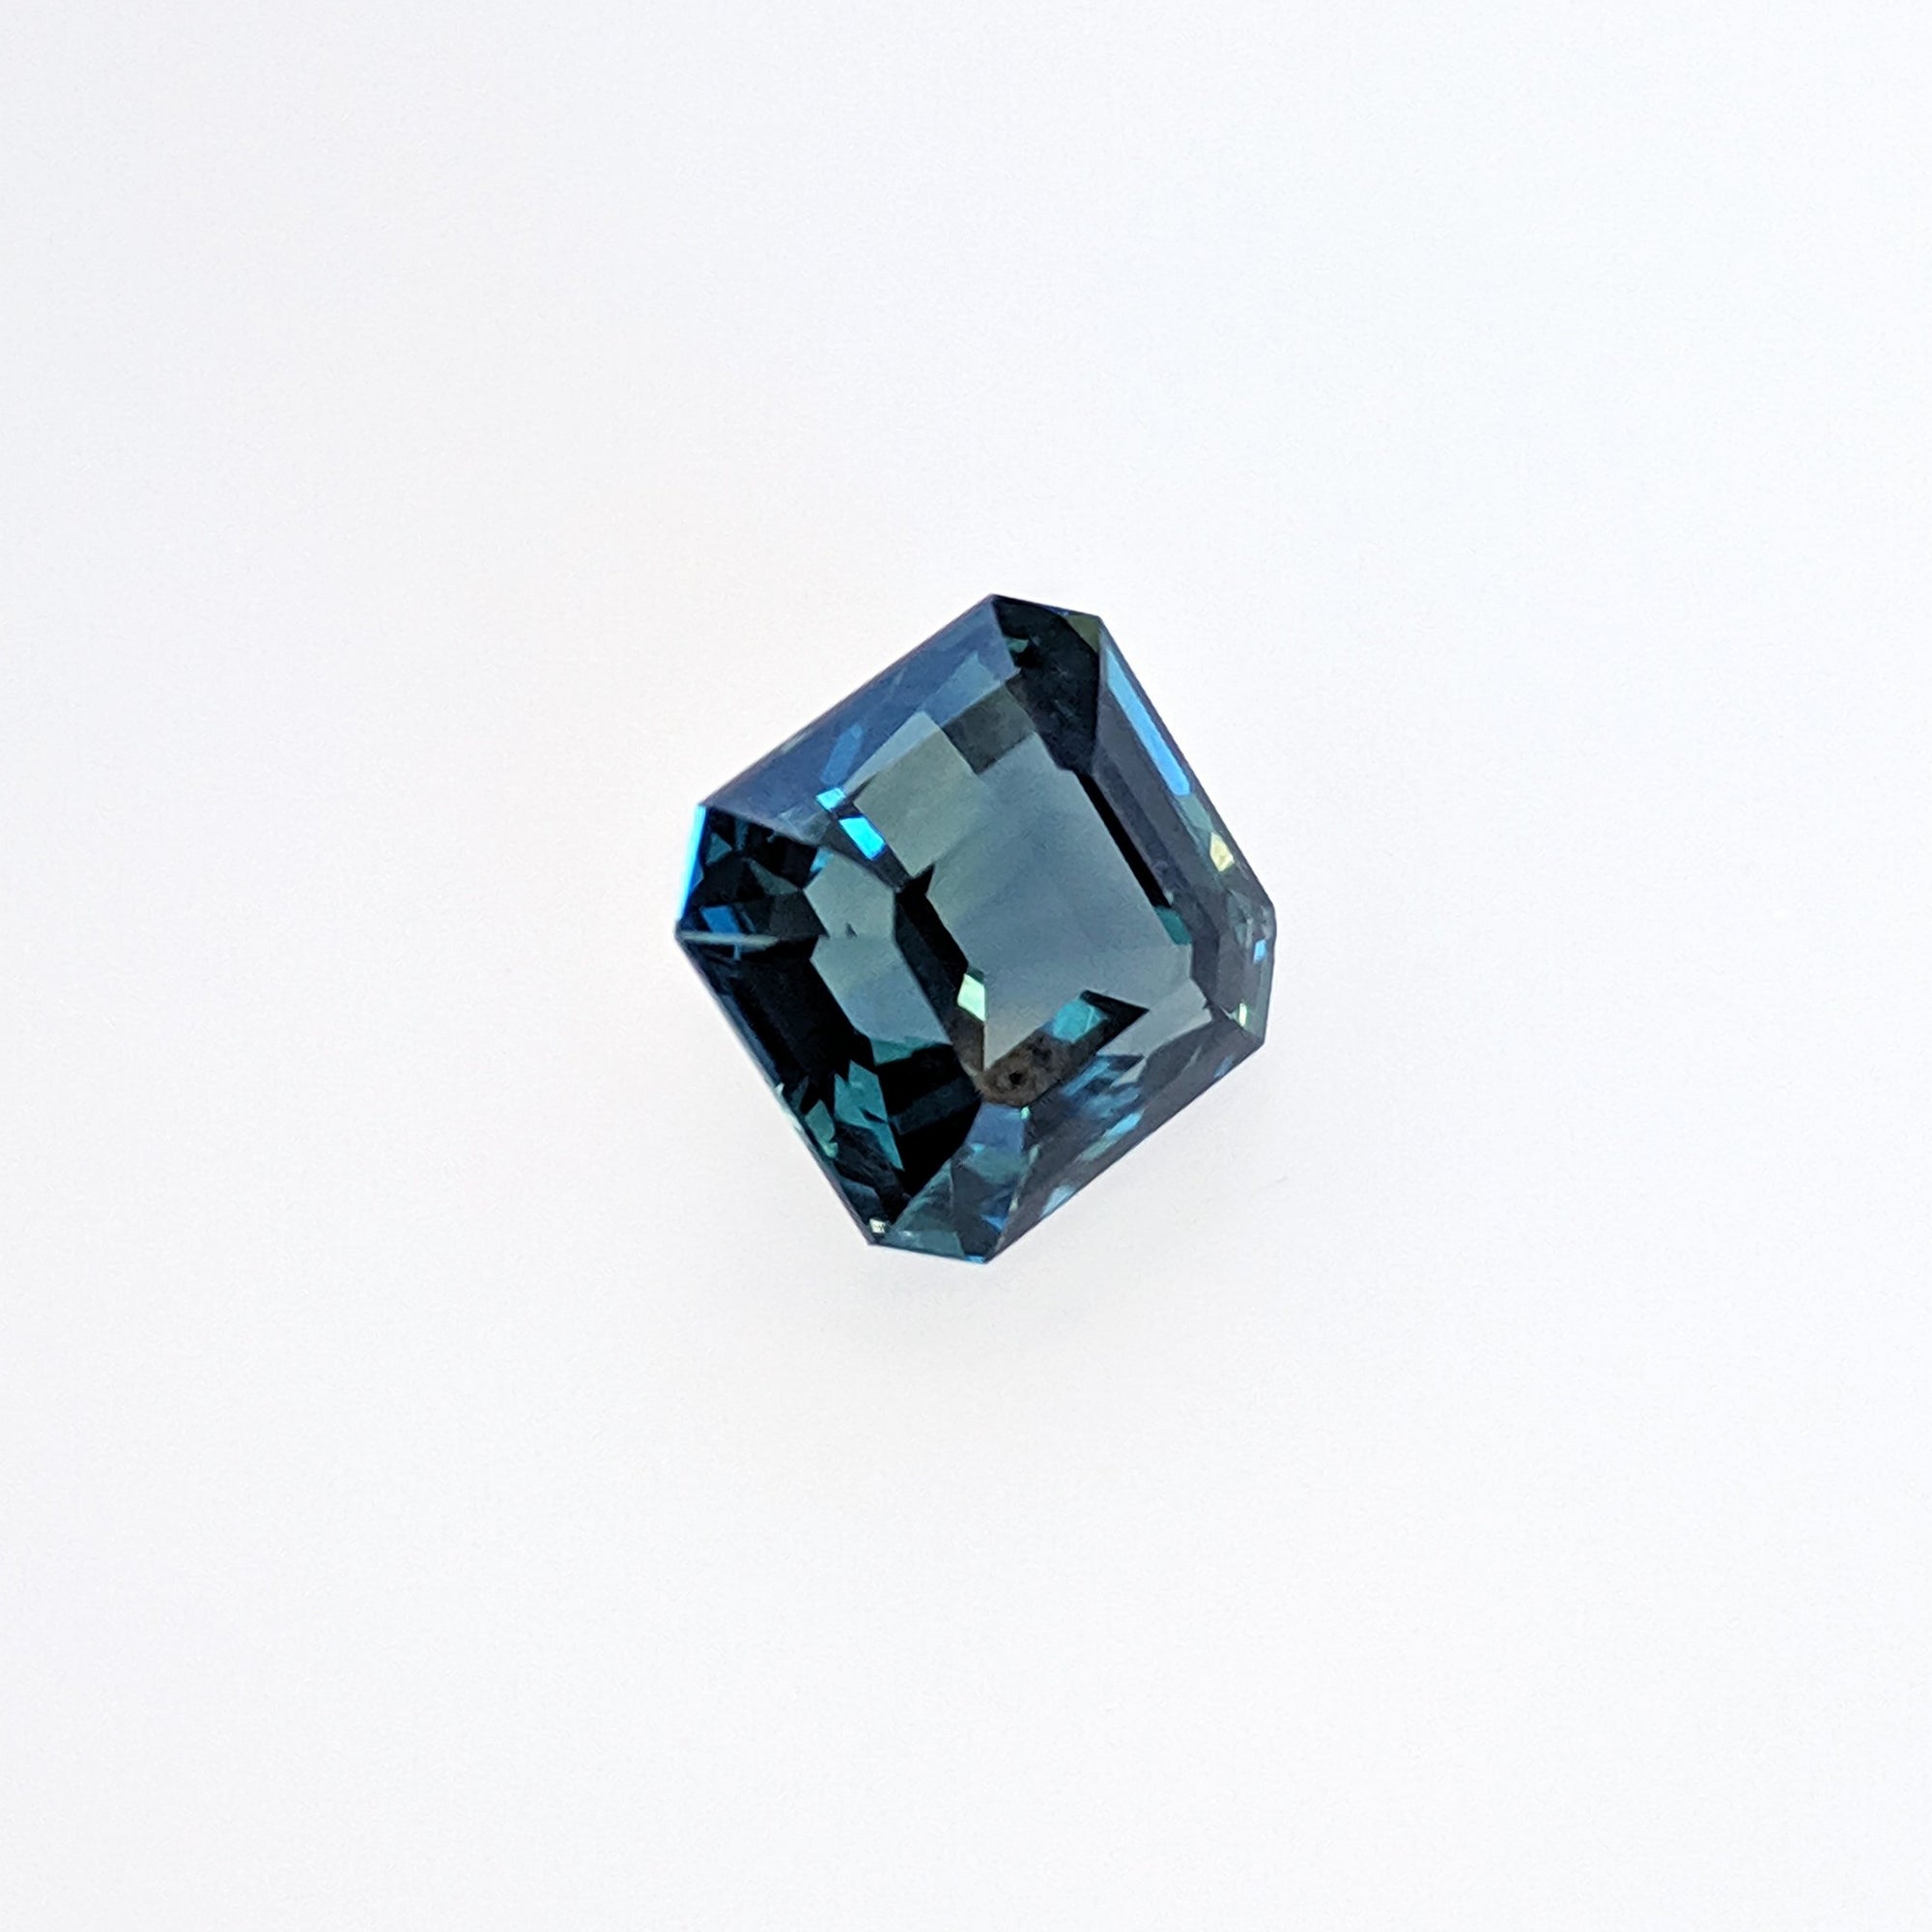 4.47 Carat Color Change Green to Blue Sapphire